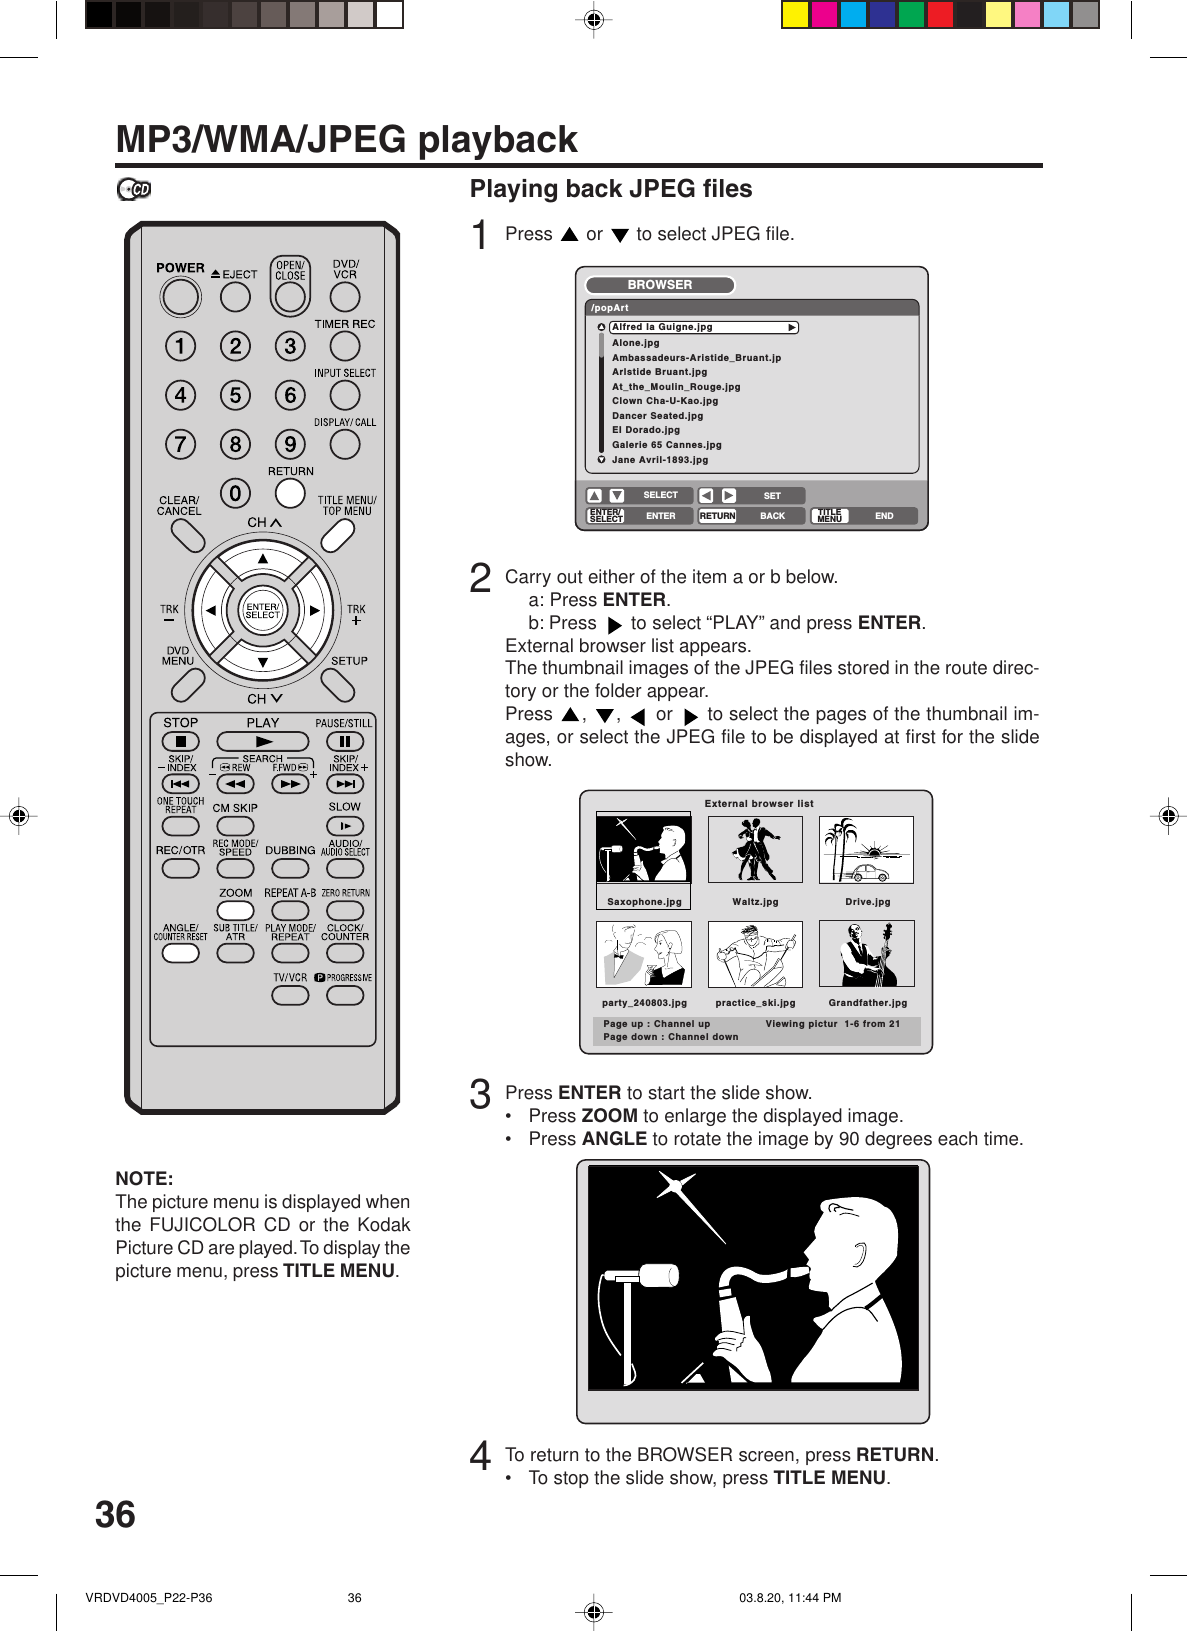 36MP3/WMA/JPEG playbackNOTE:The picture menu is displayed whenthe FUJICOLOR CD or the KodakPicture CD are played. To display thepicture menu, press TITLE MENU.Playing back JPEG files1Press   or   to select JPEG file.2Carry out either of the item a or b below.a: Press ENTER.b: Press   to select “PLAY” and press ENTER.External browser list appears.The thumbnail images of the JPEG files stored in the route direc-tory or the folder appear.Press  ,  ,   or   to select the pages of the thumbnail im-ages, or select the JPEG file to be displayed at first for the slideshow.3Press ENTER to start the slide show.•Press ZOOM to enlarge the displayed image.•Press ANGLE to rotate the image by 90 degrees each time.4To return to the BROWSER screen, press RETURN.•To stop the slide show, press TITLE MENU.Alone.jpgAmbassadeurs-Aristide_Bruant.jpArlstide Bruant.jpgAt_the_Moulin_Rouge.jpgClown Cha-U-Kao.jpgDancer Seated.jpgEI Dorado.jpgGalerie 65 Cannes.jpgJane Avril-1893.jpgAlfred Ia Guigne.jpg/popArtBROWSERENTER/SELECTRETURNENTER BACKSETENDSELECTTITLEMENUExternal browser listSaxophone.jpg Waltz.jpg Drive.jpgparty_240803.jpg practice_ski.jpg Grandfather.jpgPage up : Channel up Viewing pictur  1-6 from 21Page down : Channel downVRDVD4005_P22-P36 03.8.20, 11:44 PM36